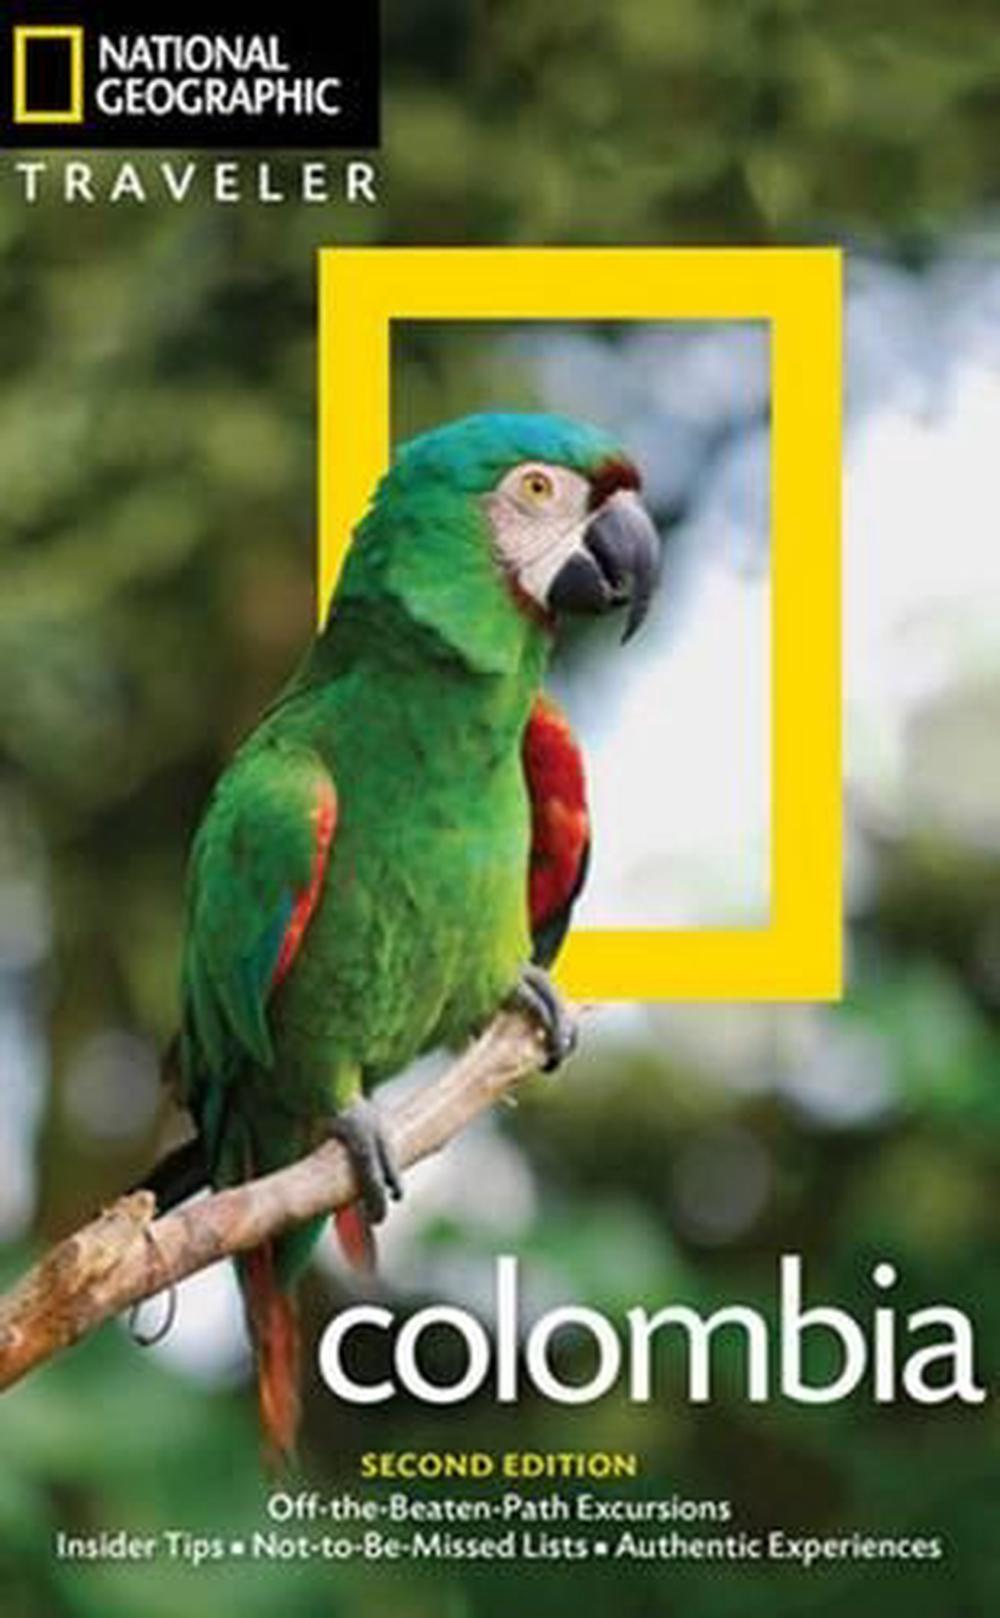 national geographic colombia tour